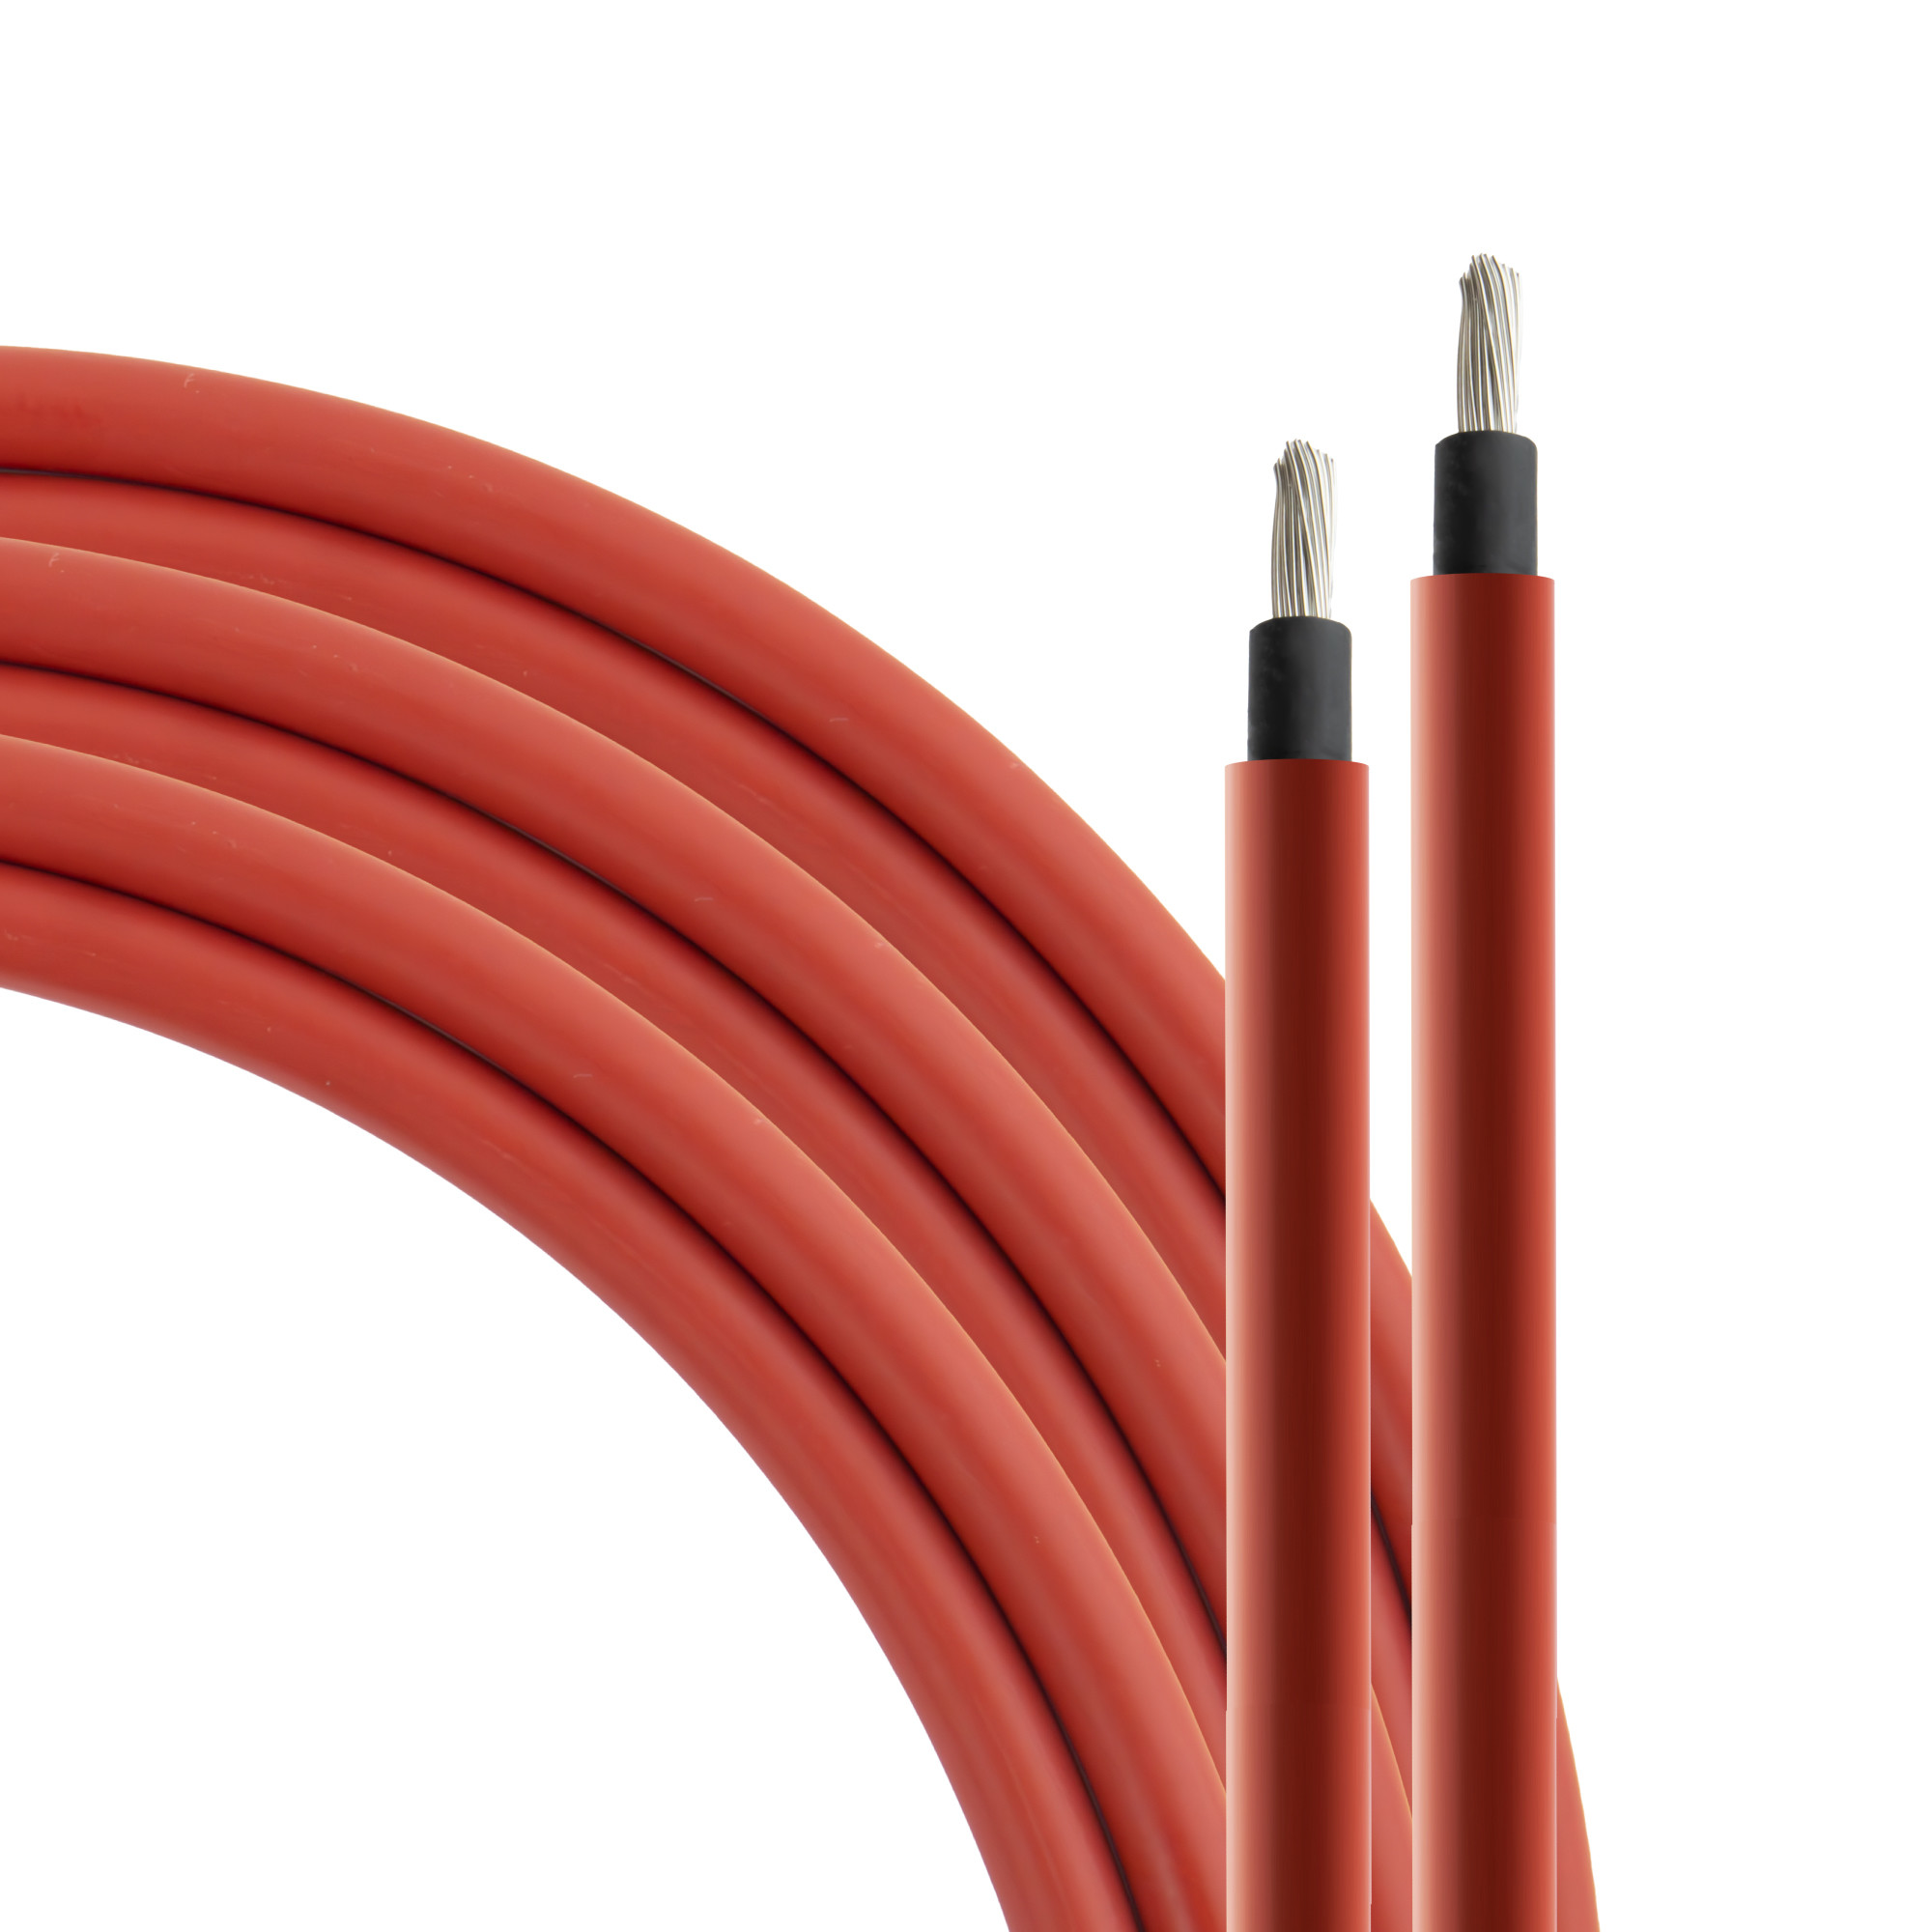 Solar cable 6 mm² red - 50m